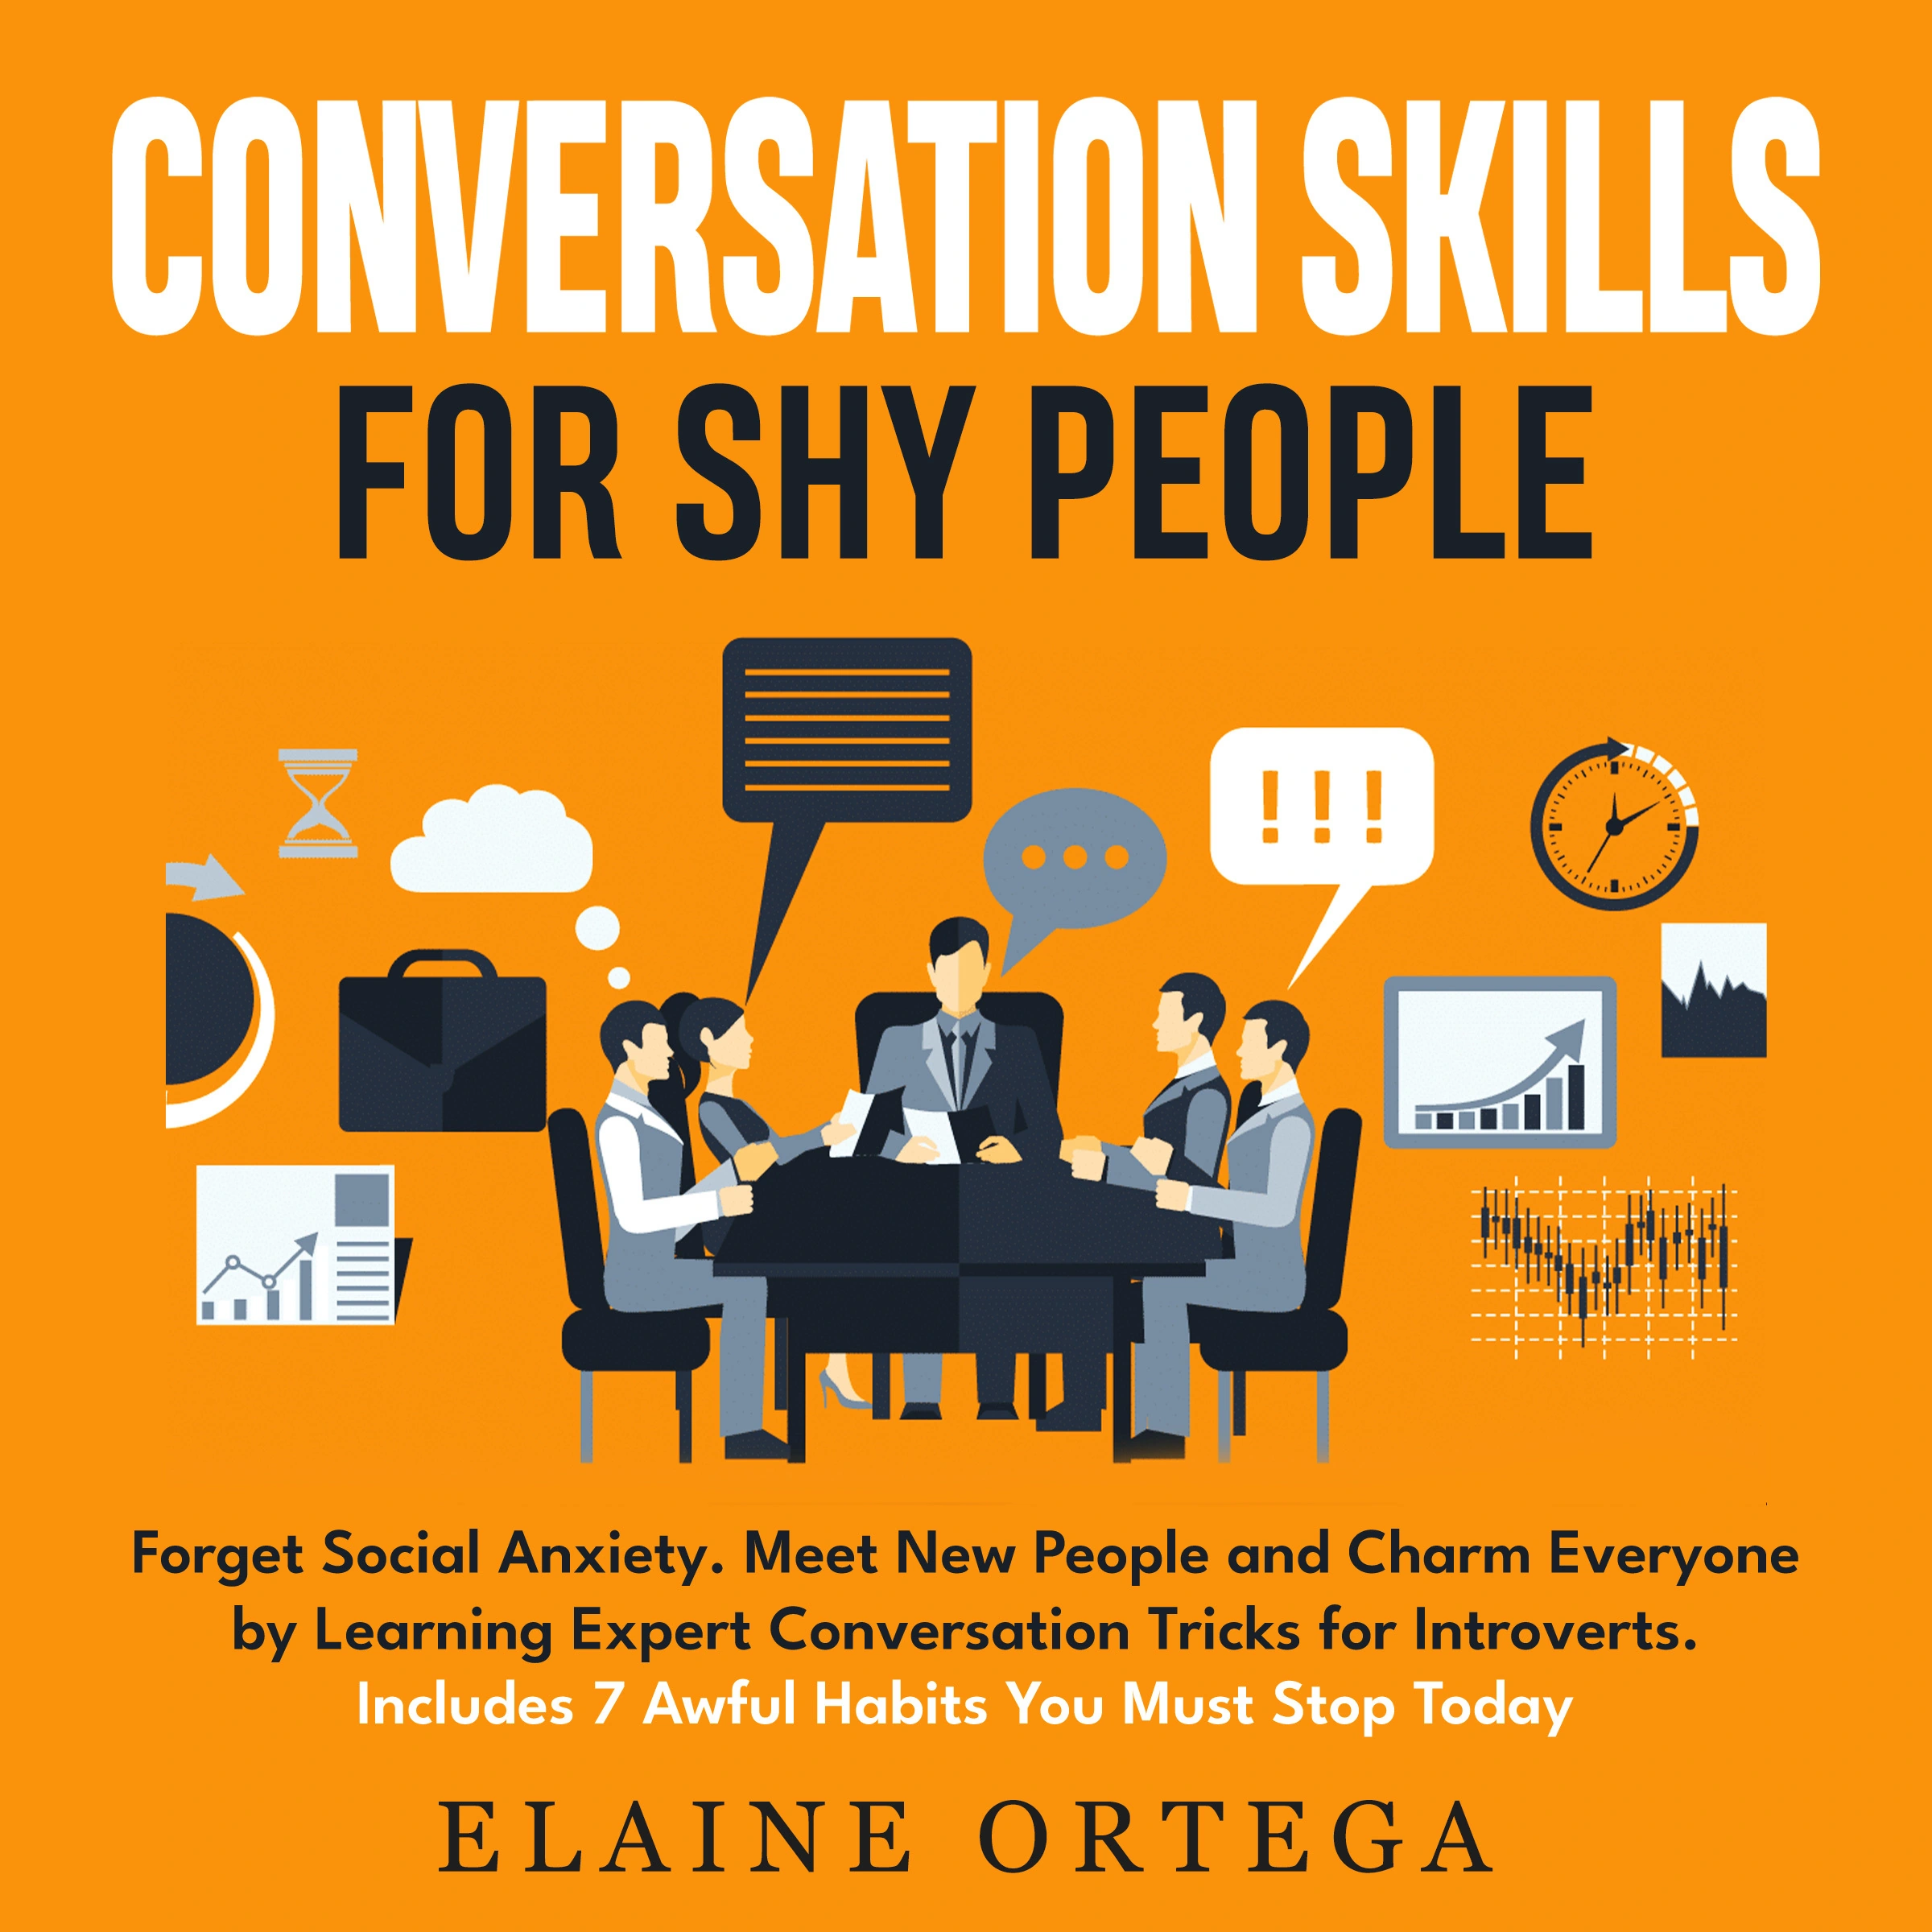 Conversation Skills for Shy People Audiobook by Elaine Ortega